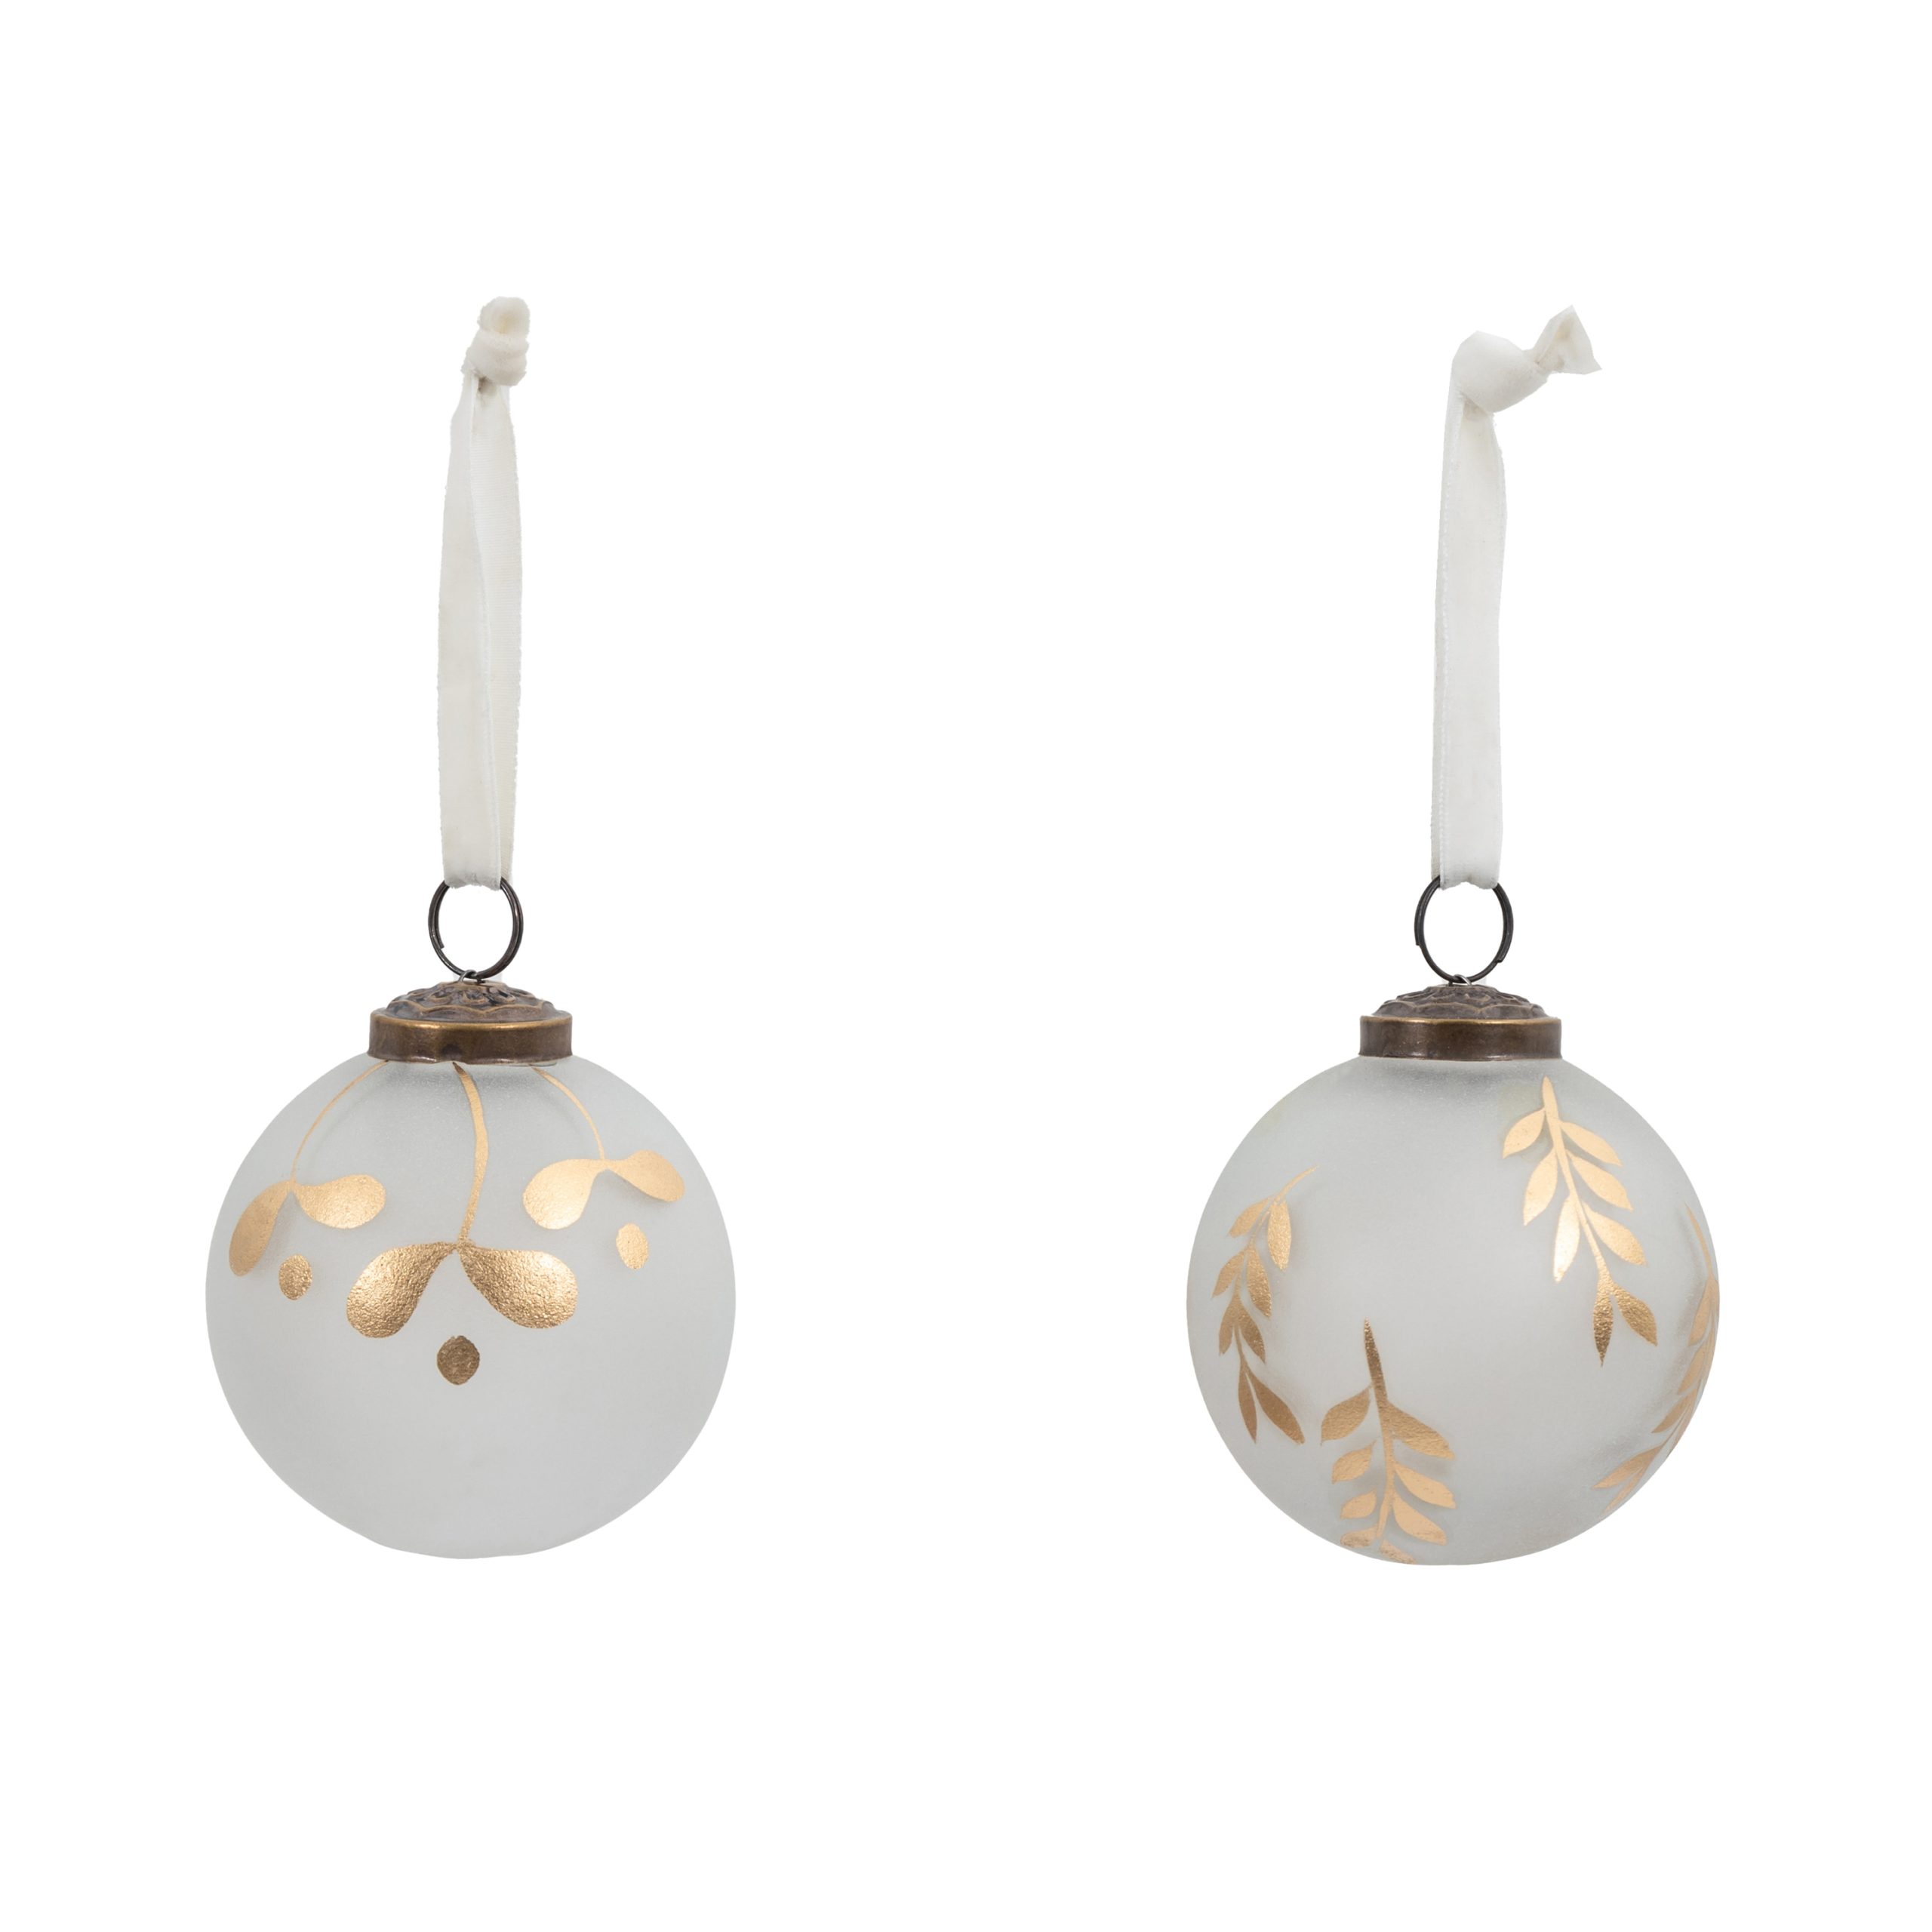 Gallery Direct Mistel Baubles White Gold (Set of 6)